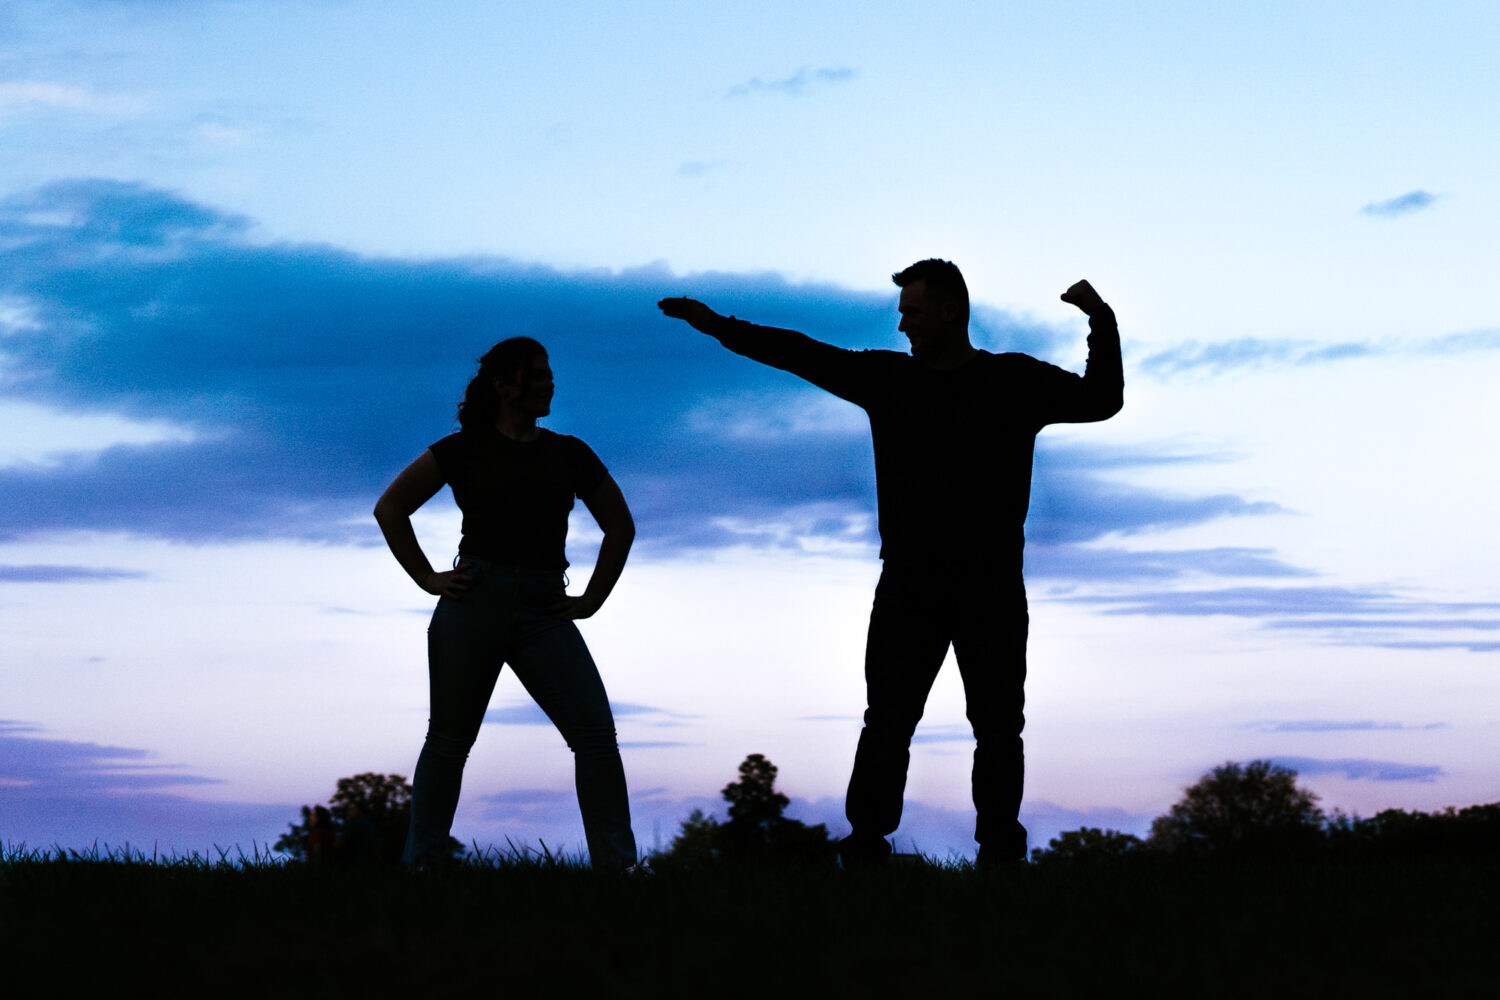 couple posing for an epic silhouette image during blue hour